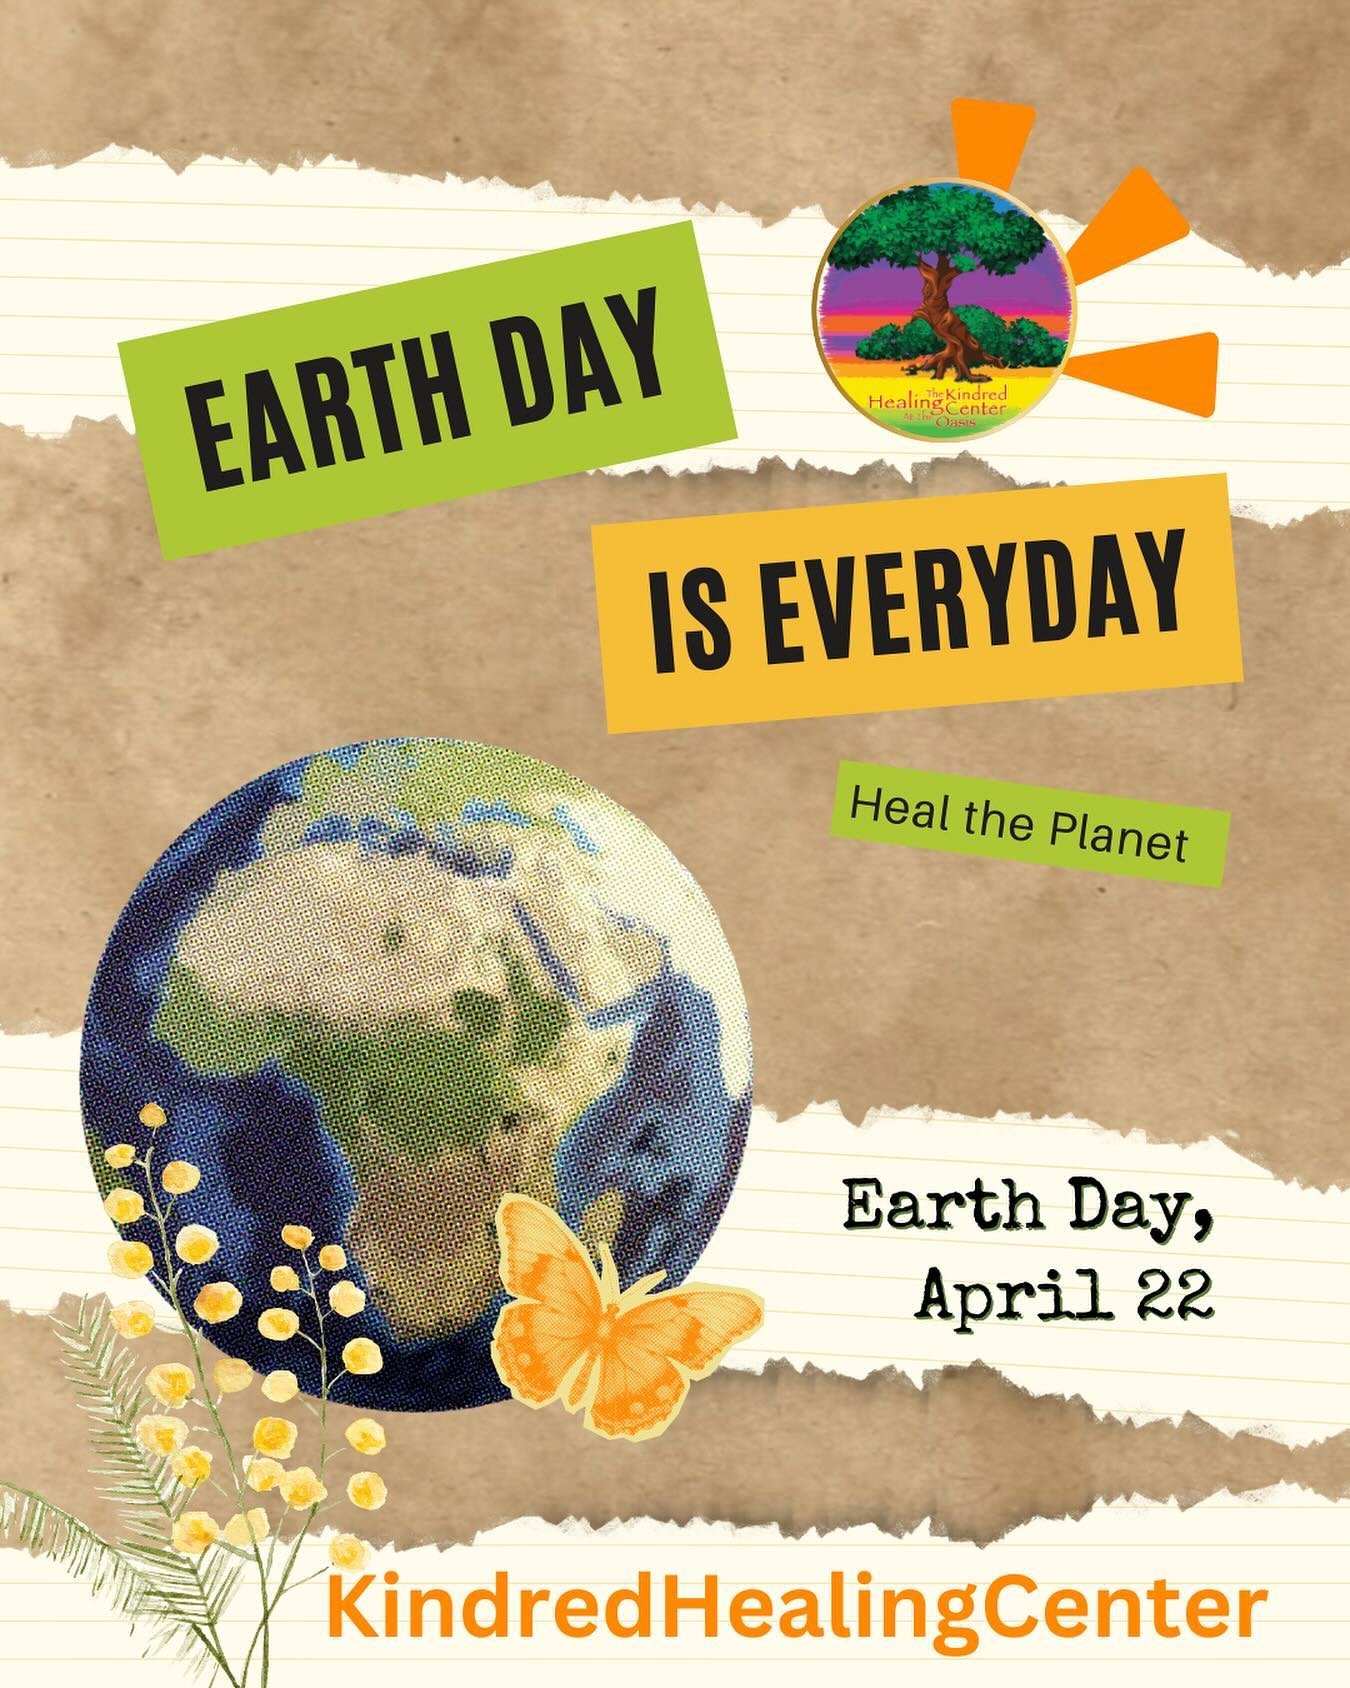 Happy Earth Day from Kindred Healing Center. 

Let&rsquo;s celebrate our beautiful planet and commit to nurturing it every day. 

Join us in honoring Mother Earth by practicing mindfulness in nature, reducing waste, and embracing sustainable living.
